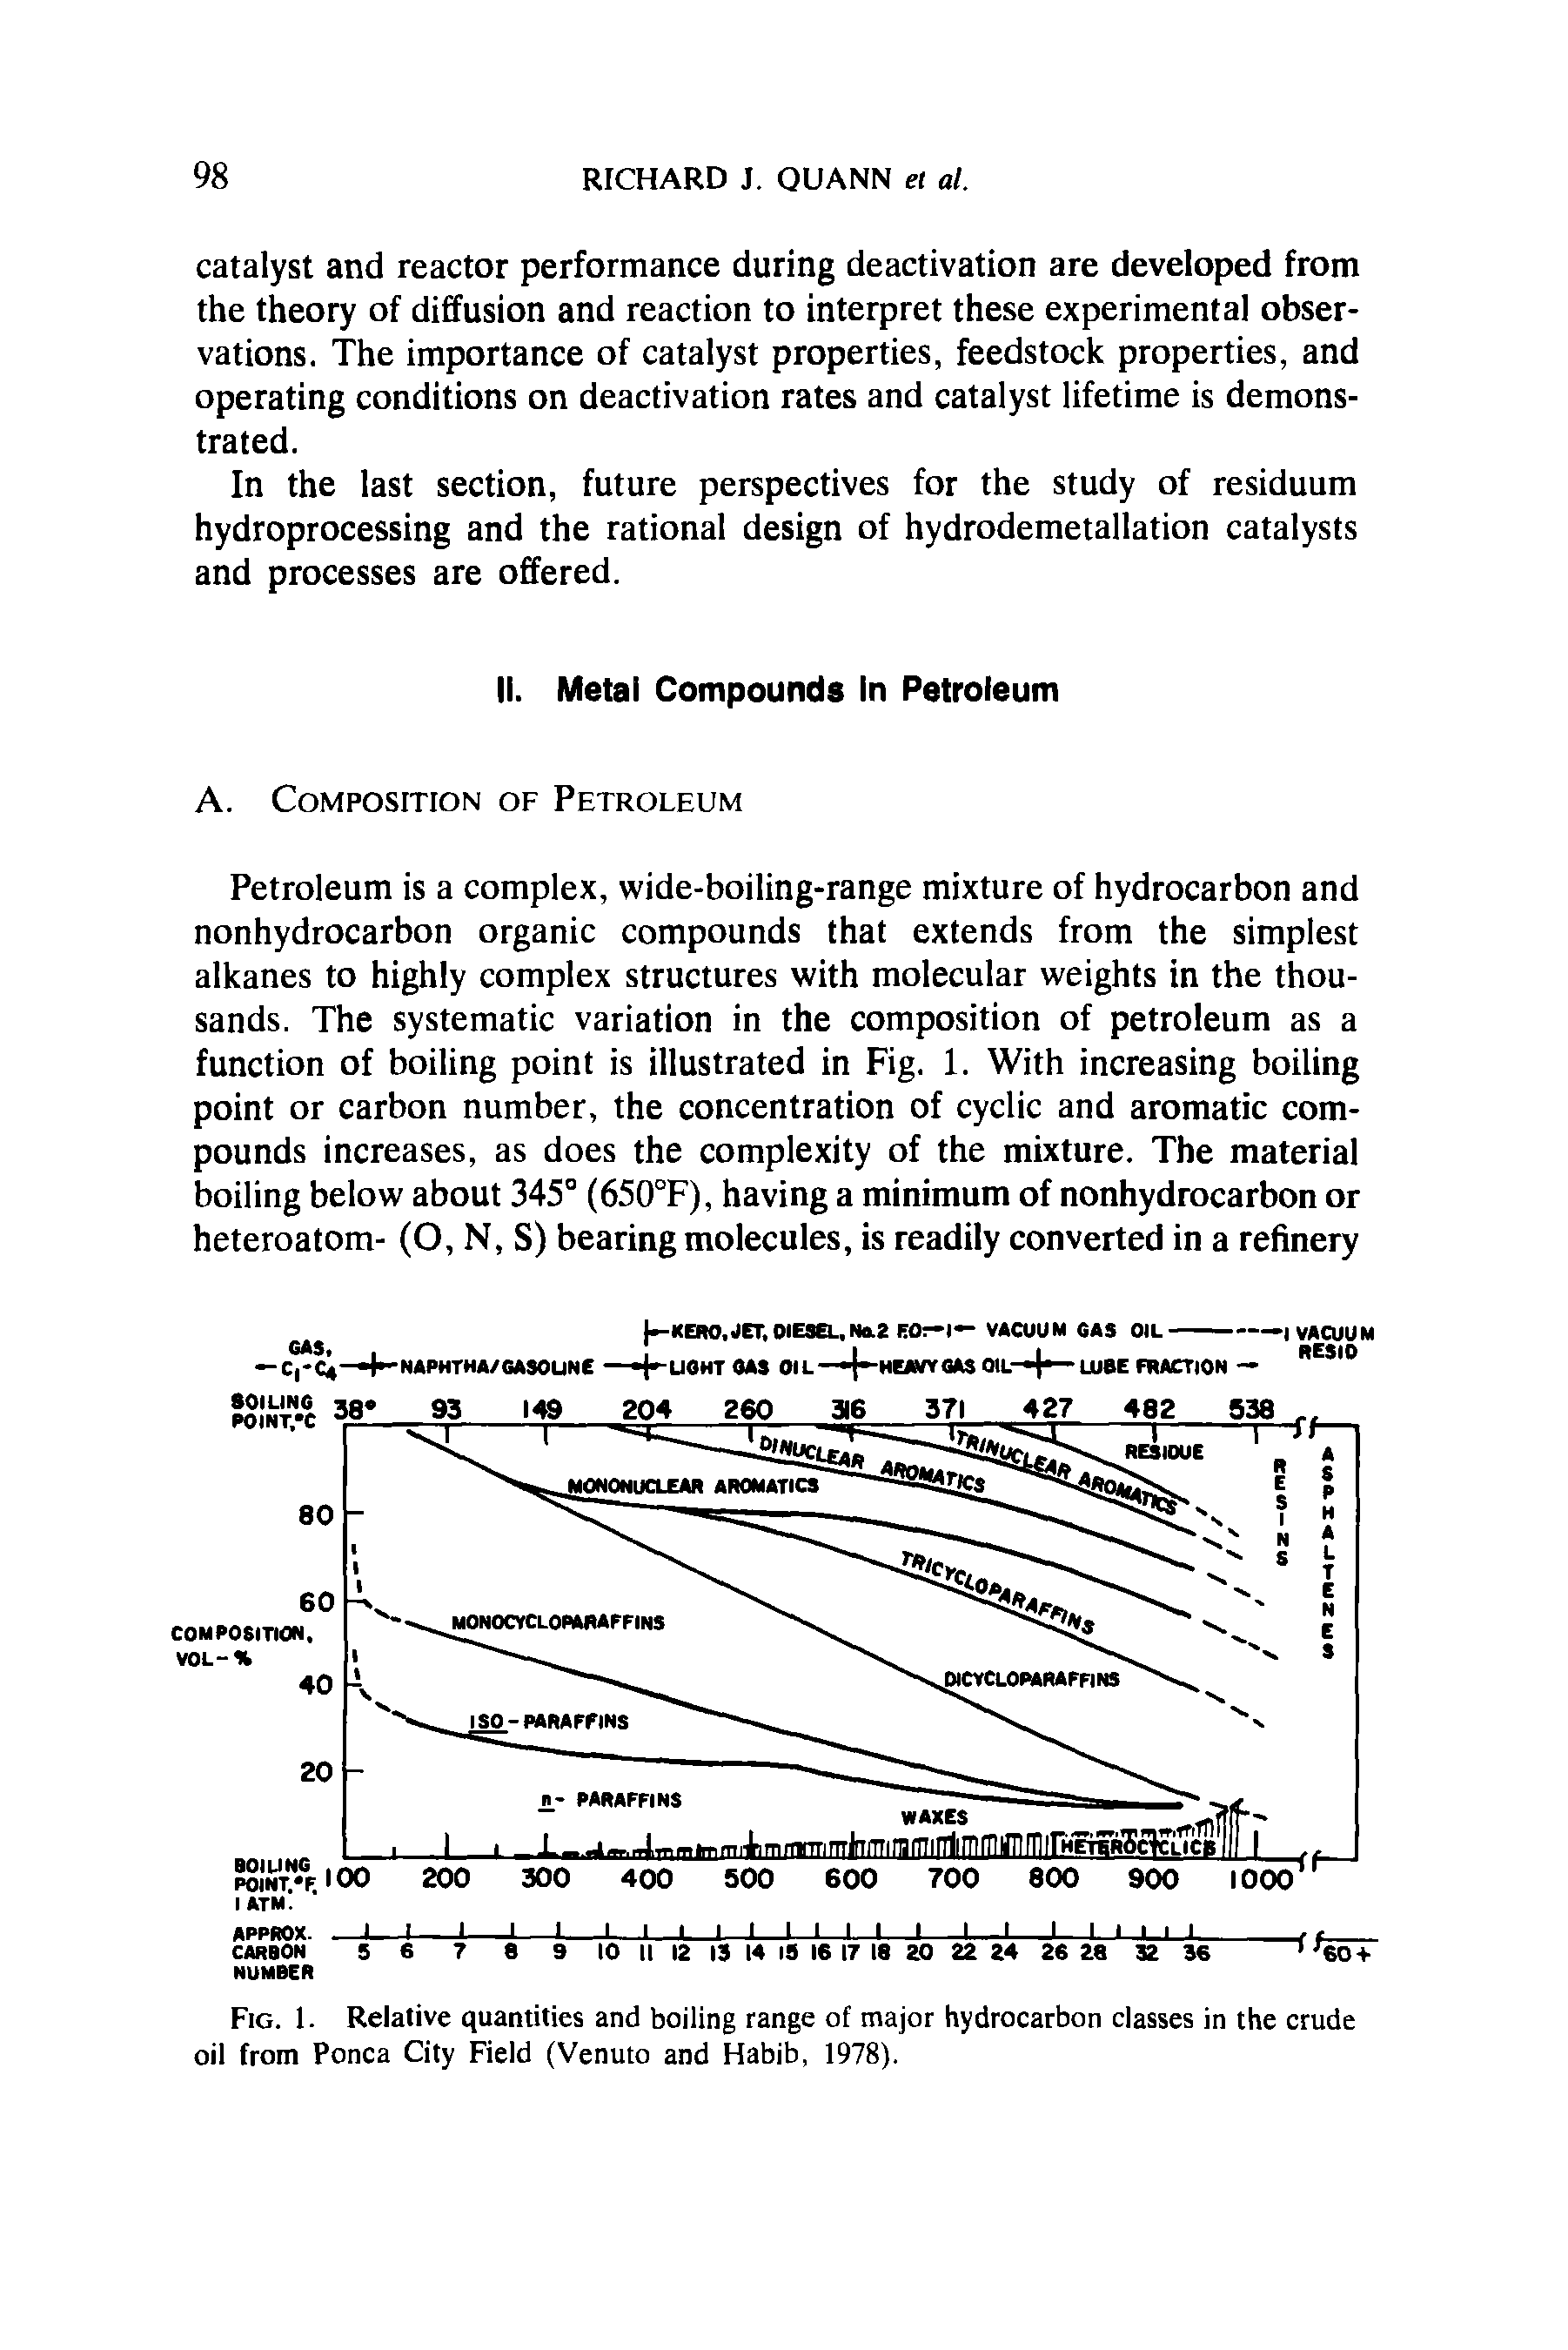 Fig. 1. Relative quantities and boiling range of major hydrocarbon classes in the crude oil from Ponca City Field (Venuto and Habib, 1978).